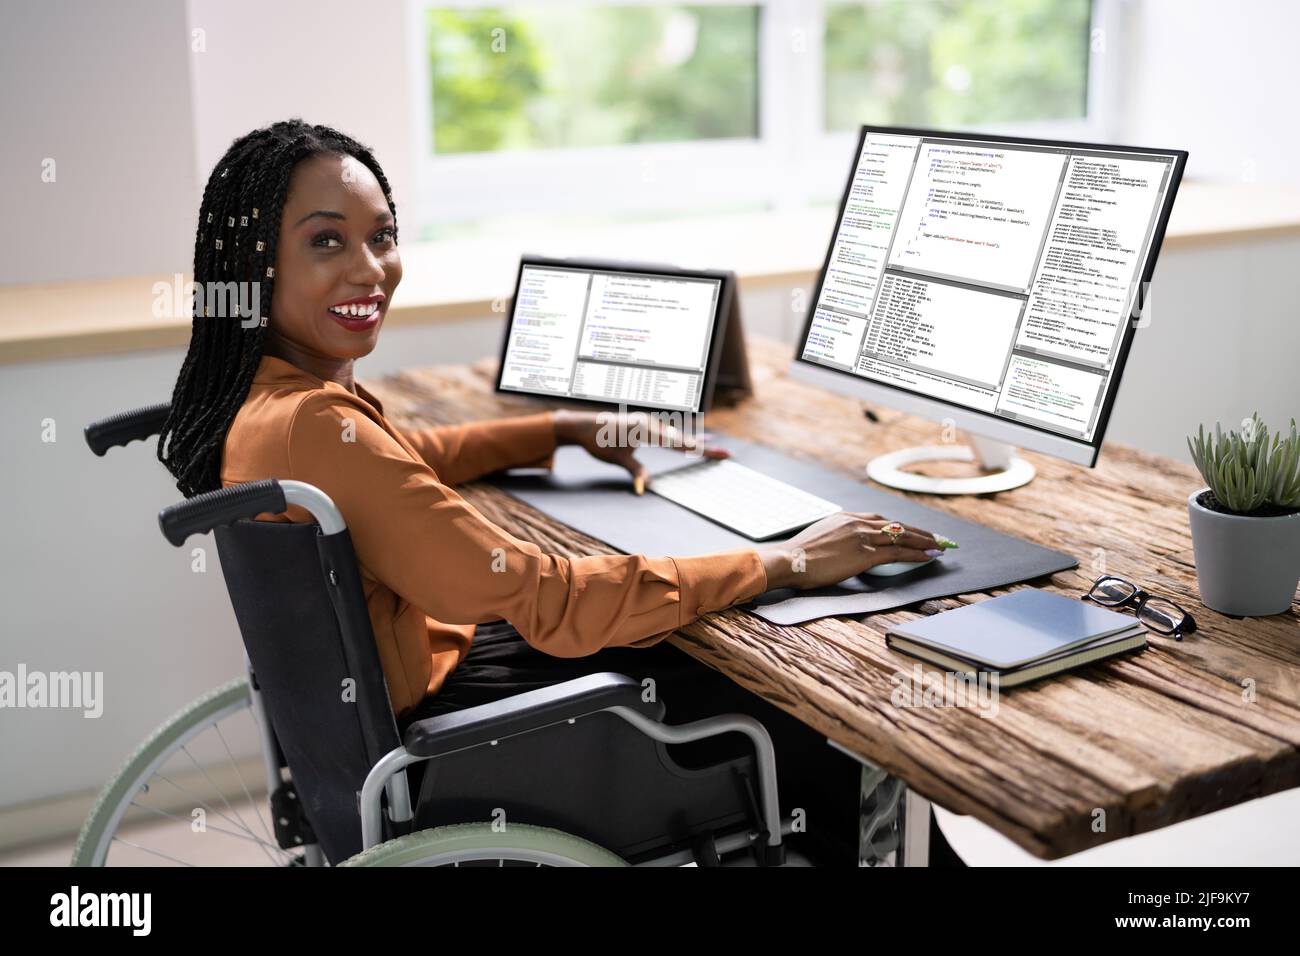 African American Woman Programmer. Girl Coding On Computer Stock Photo